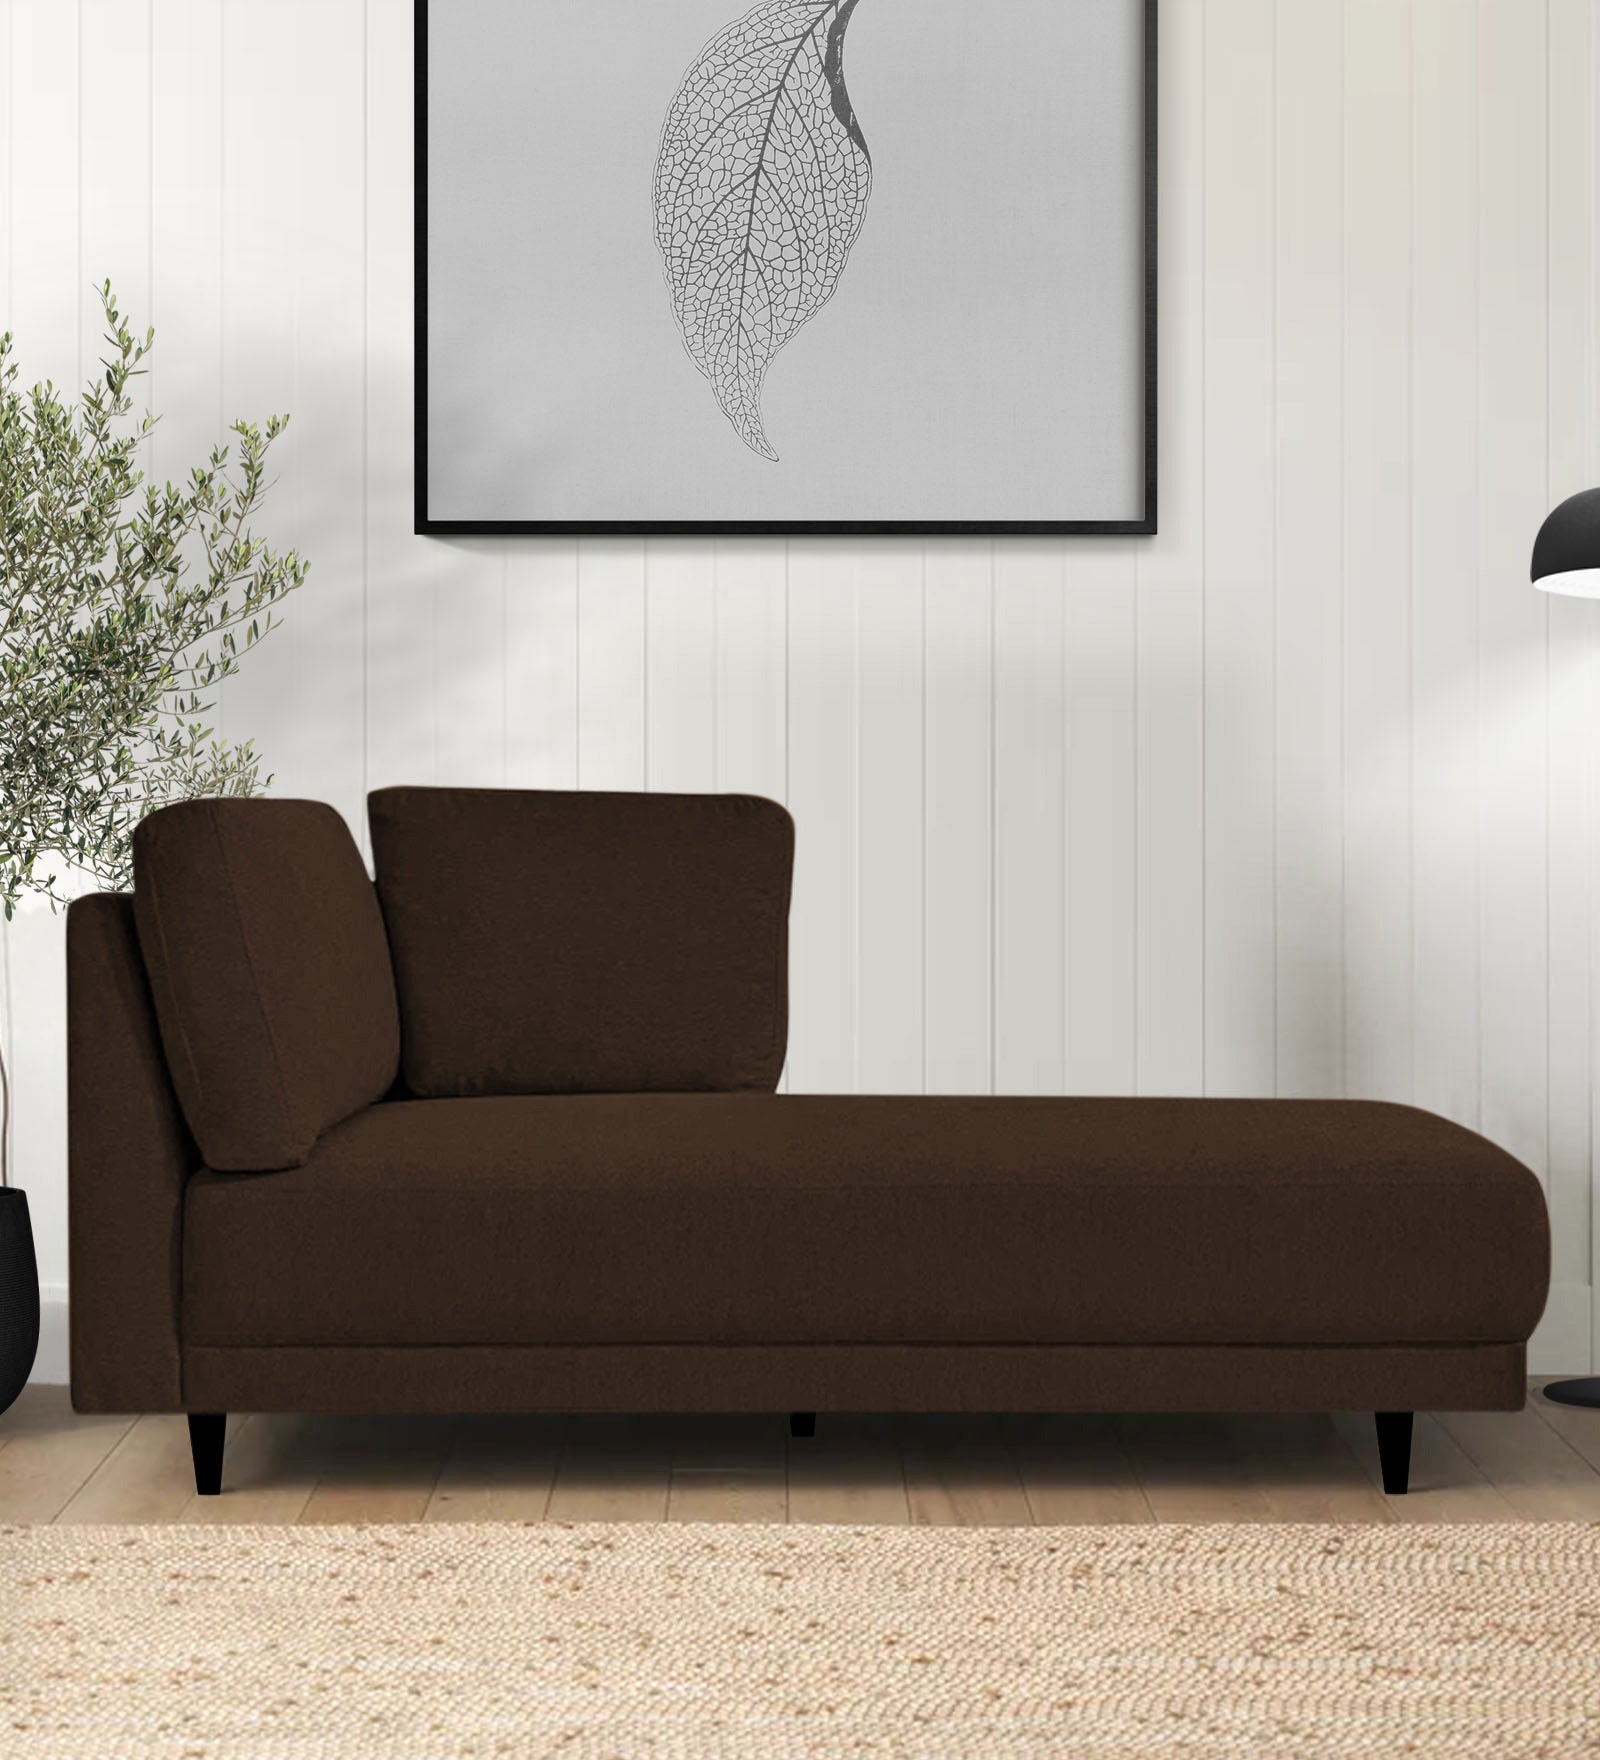 Jonze Velvet RHS Chaise Lounger in Cholocate Brown Colour